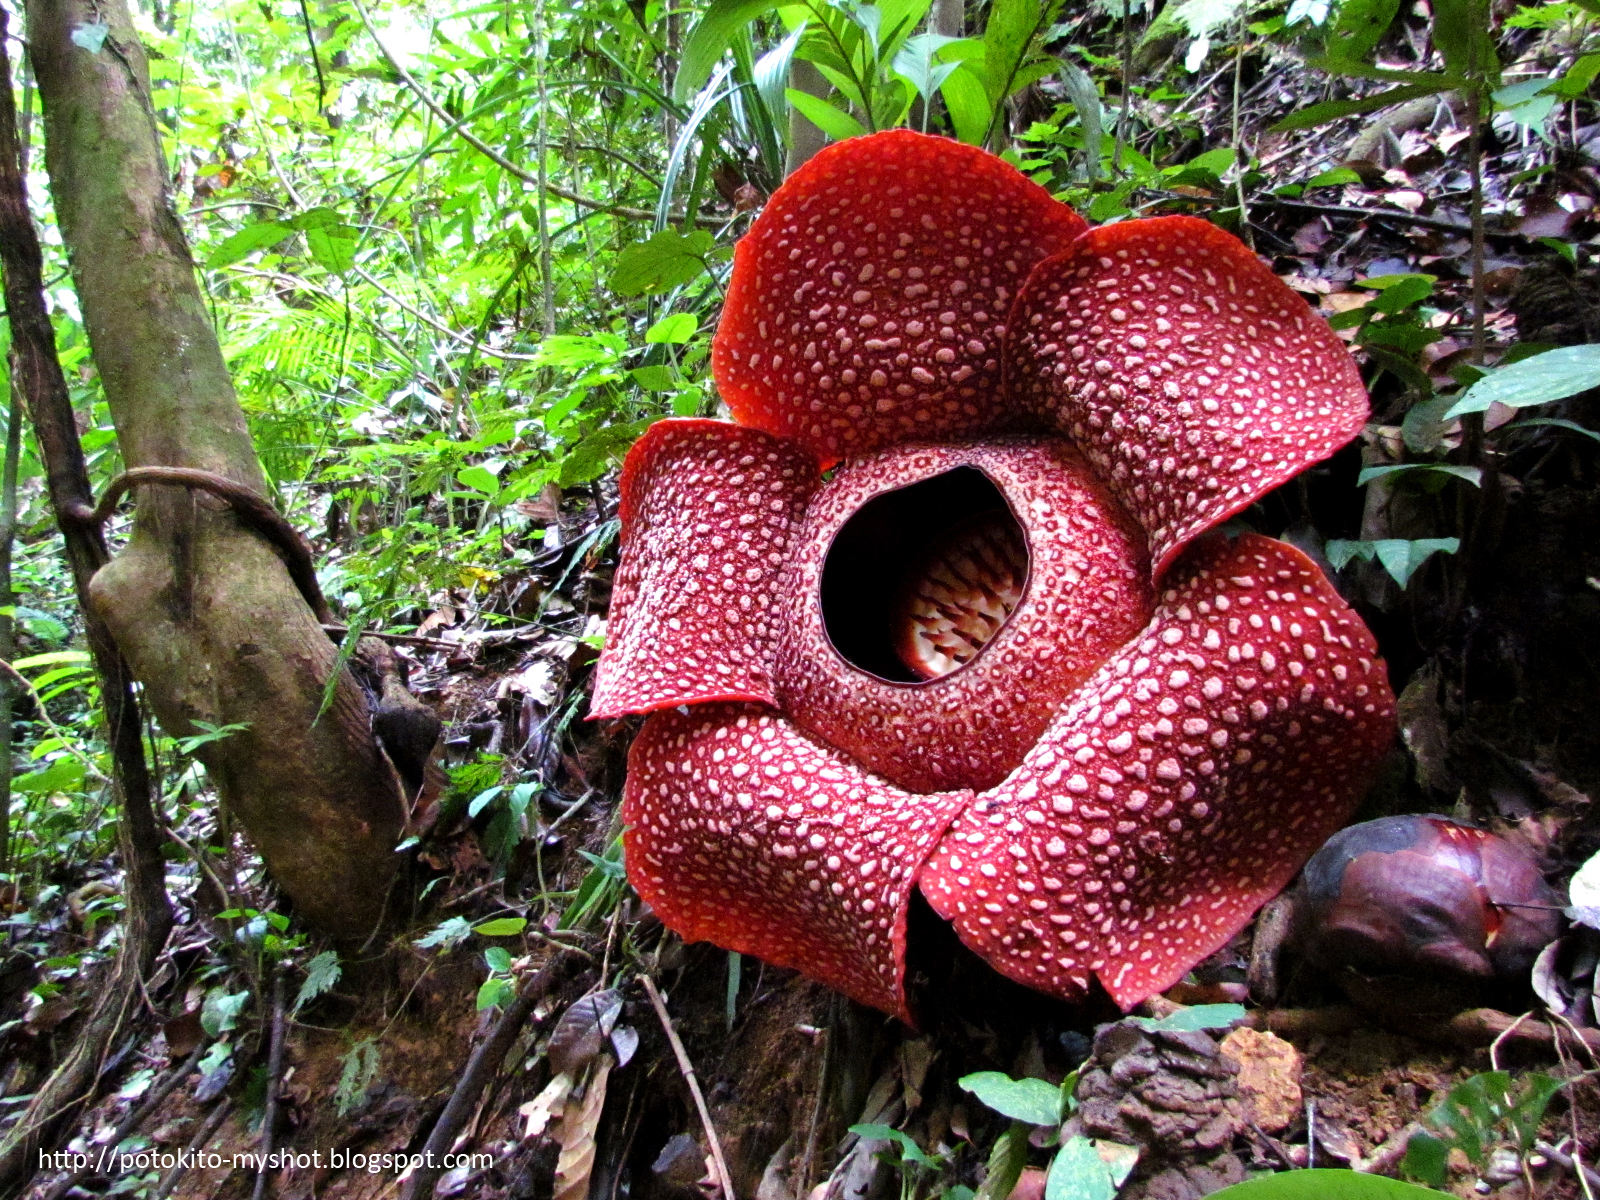 The largest flower in the world